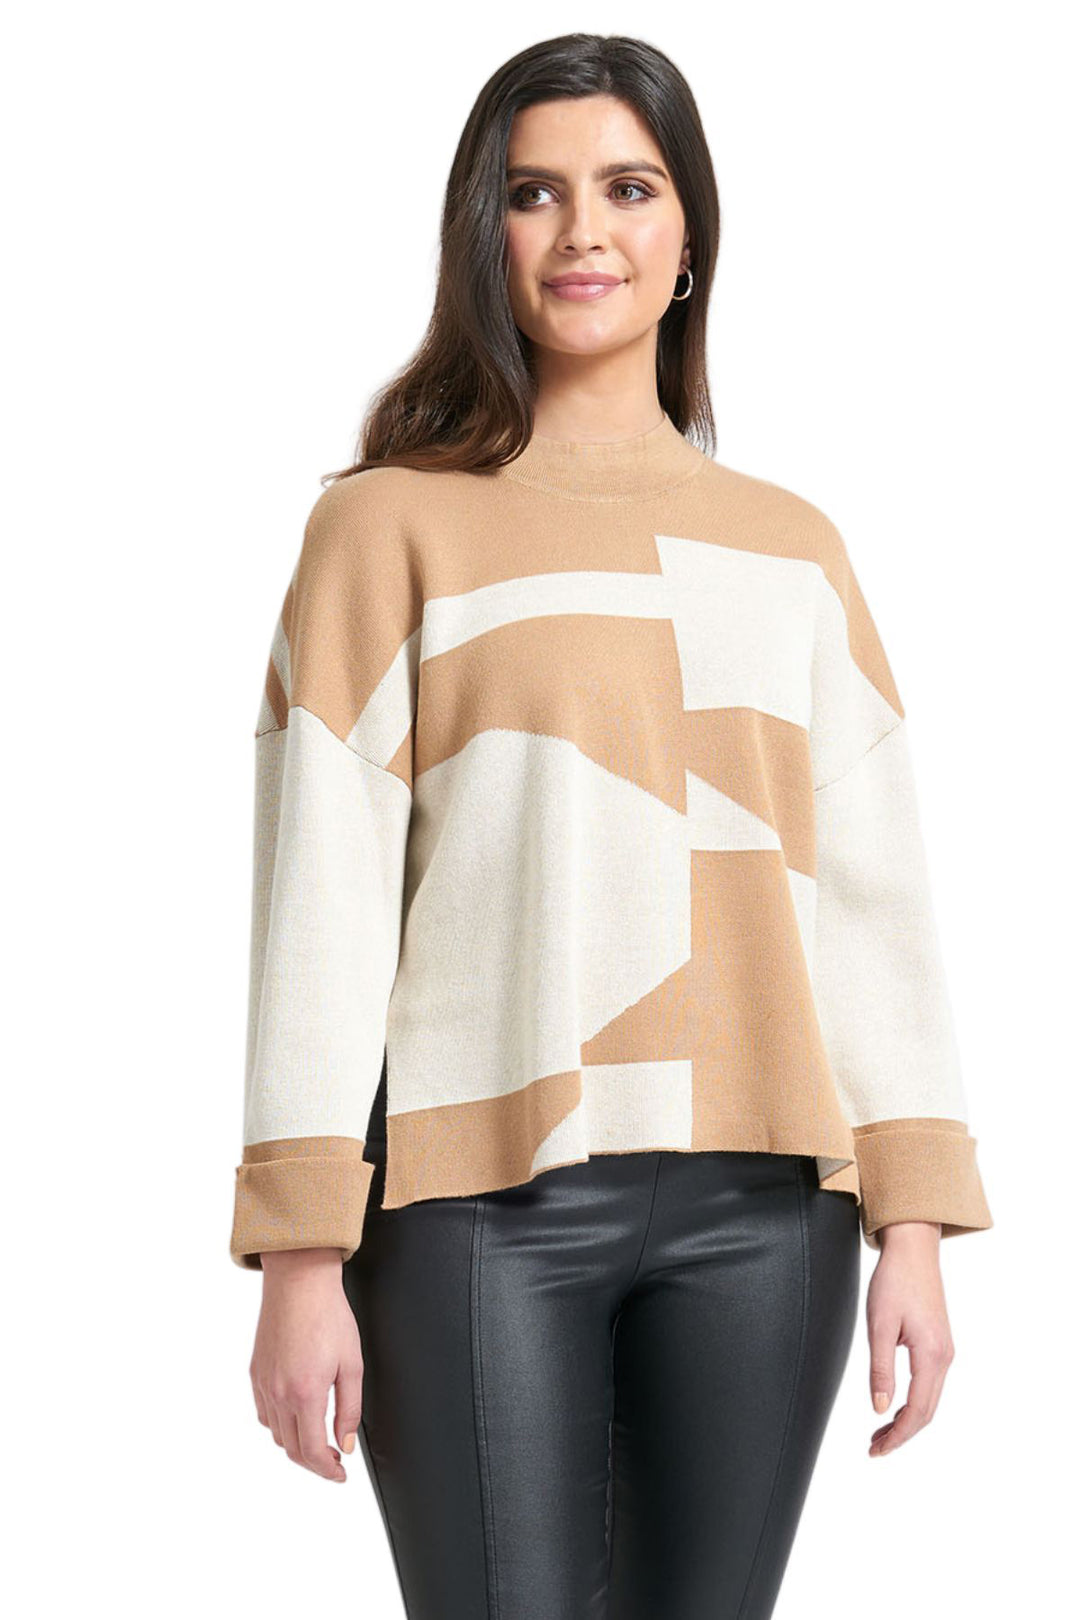 Woman wearing the block roll sweater in camel & white by FOIL, sold and shipped from Pizazz Boutique Nelson Bay women's dresses online Australia